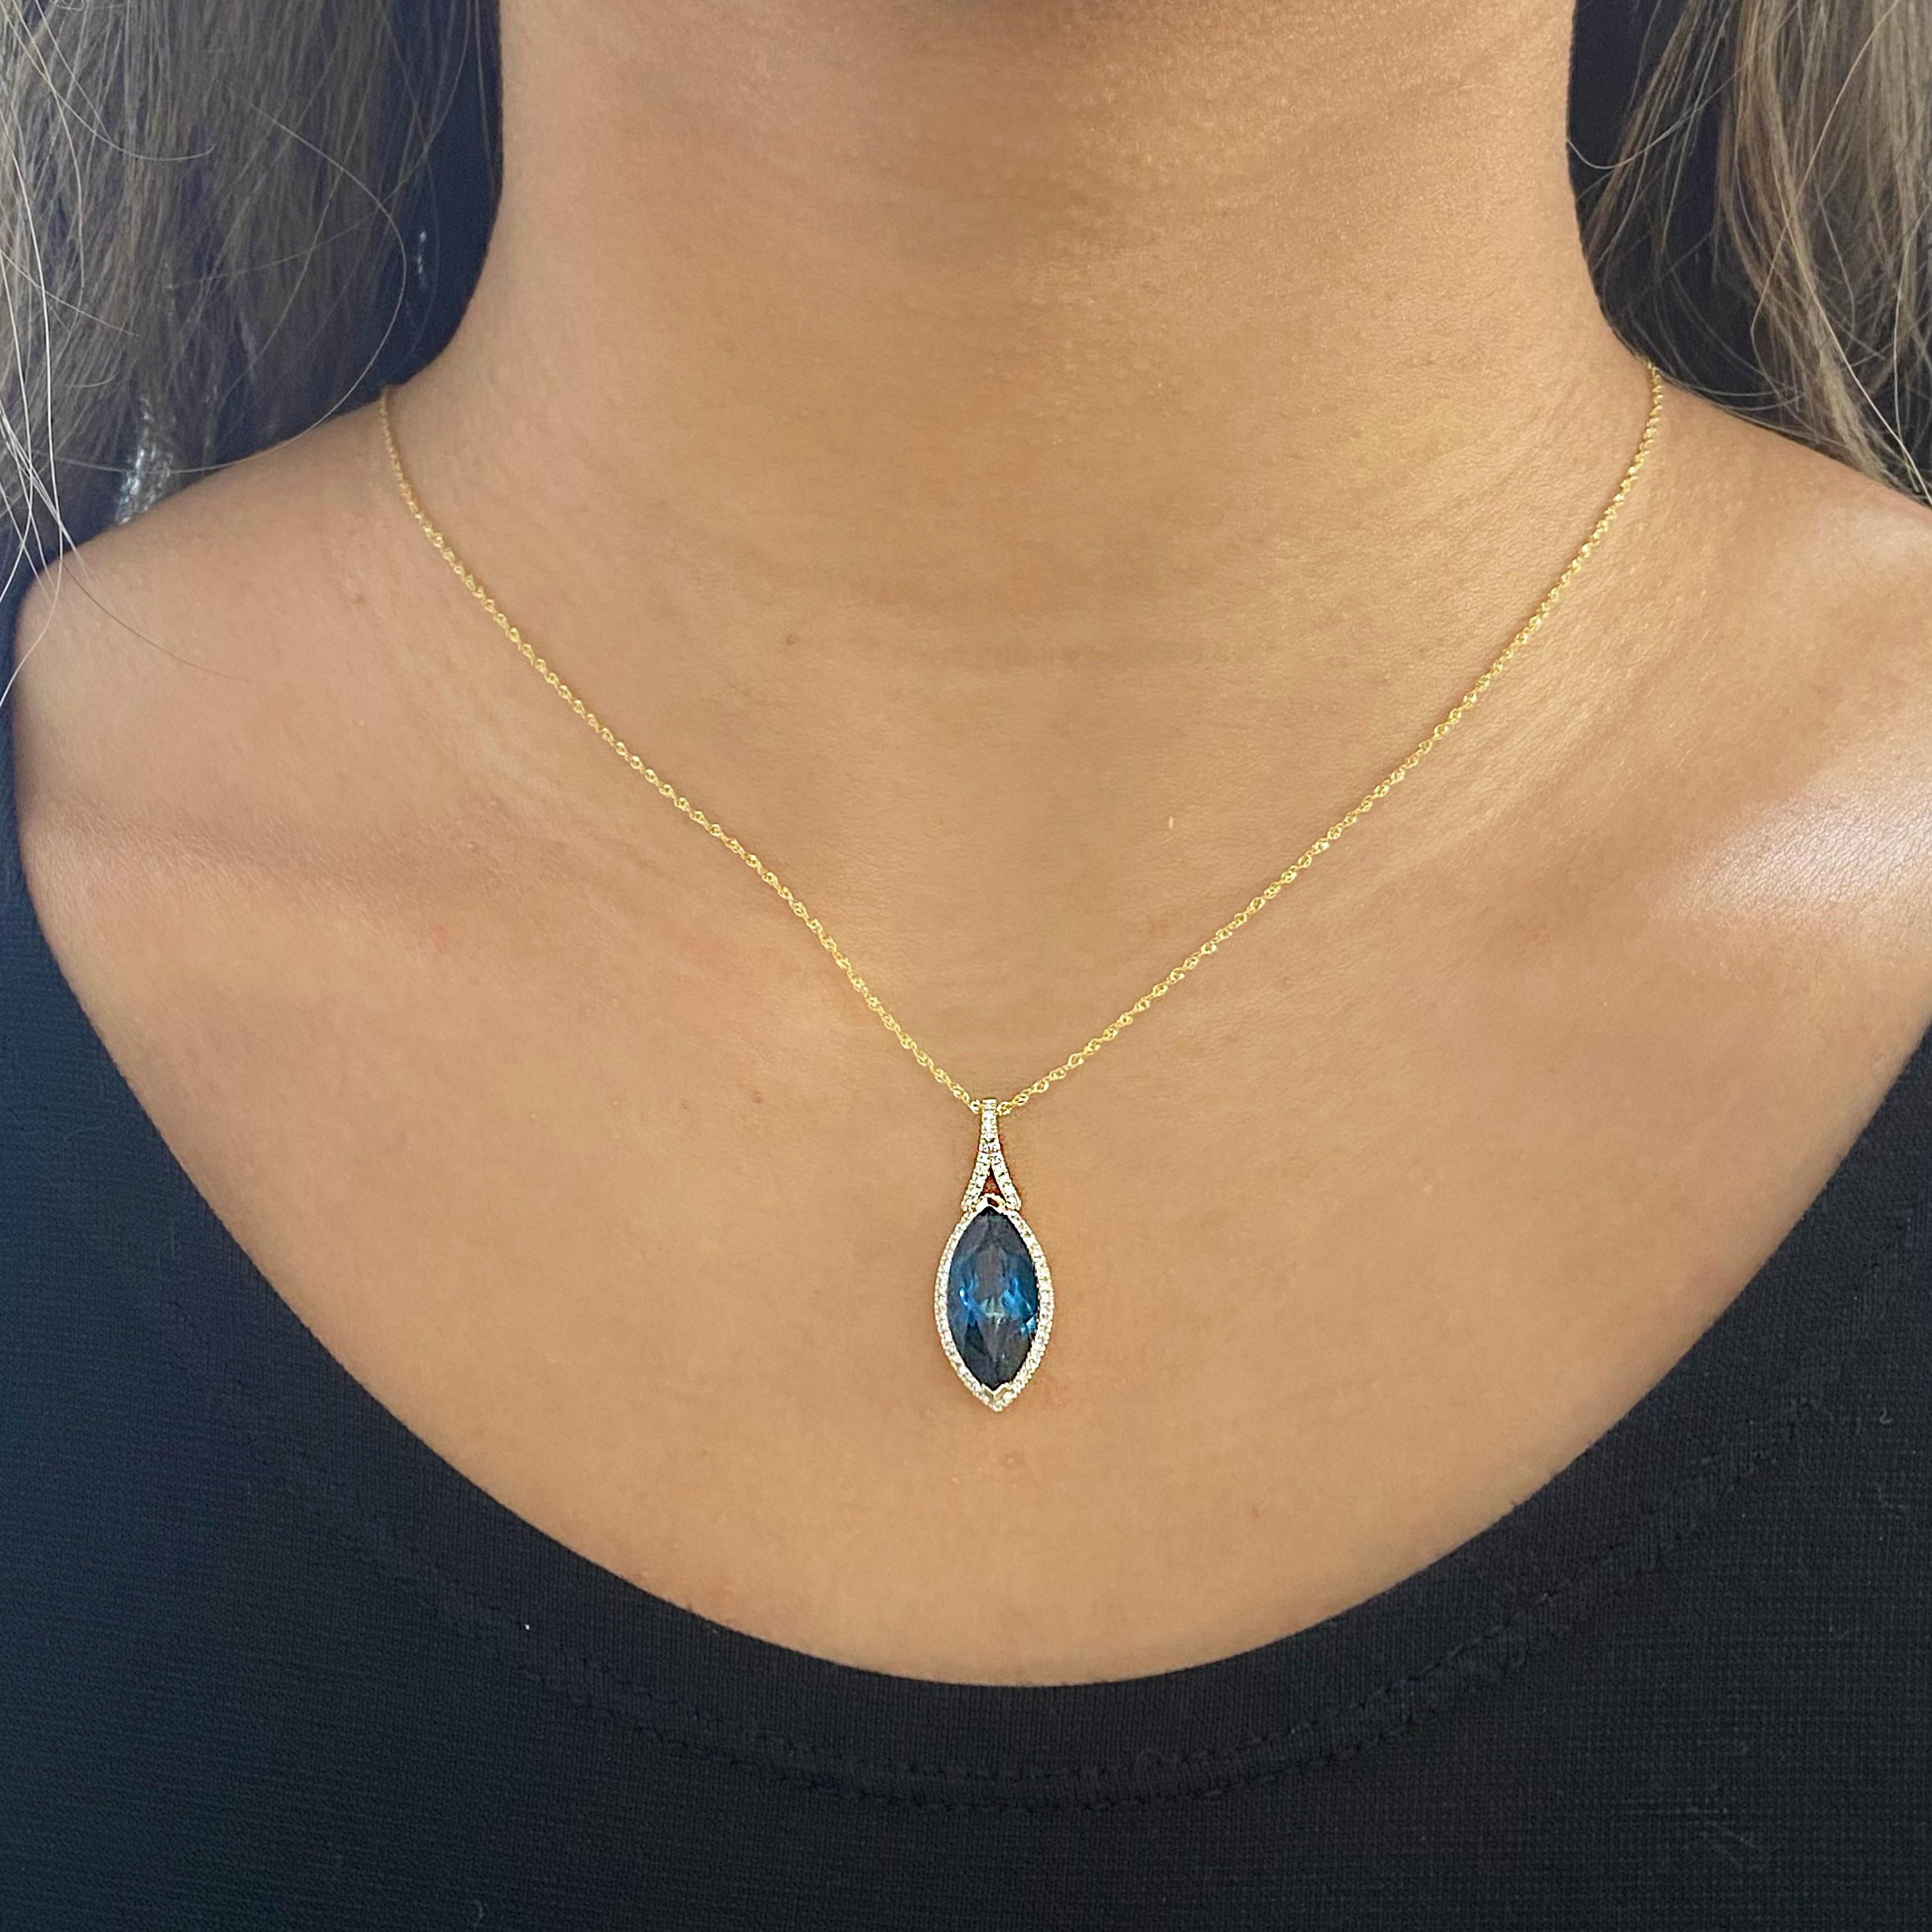 This vibrant London Blue Topaz contrasts perfectly with the yellow gold to create a fun and unique design that would catch anybody's eye. Whether it's a gift or for yourself, this necklace is special. The details for this beautiful necklace are